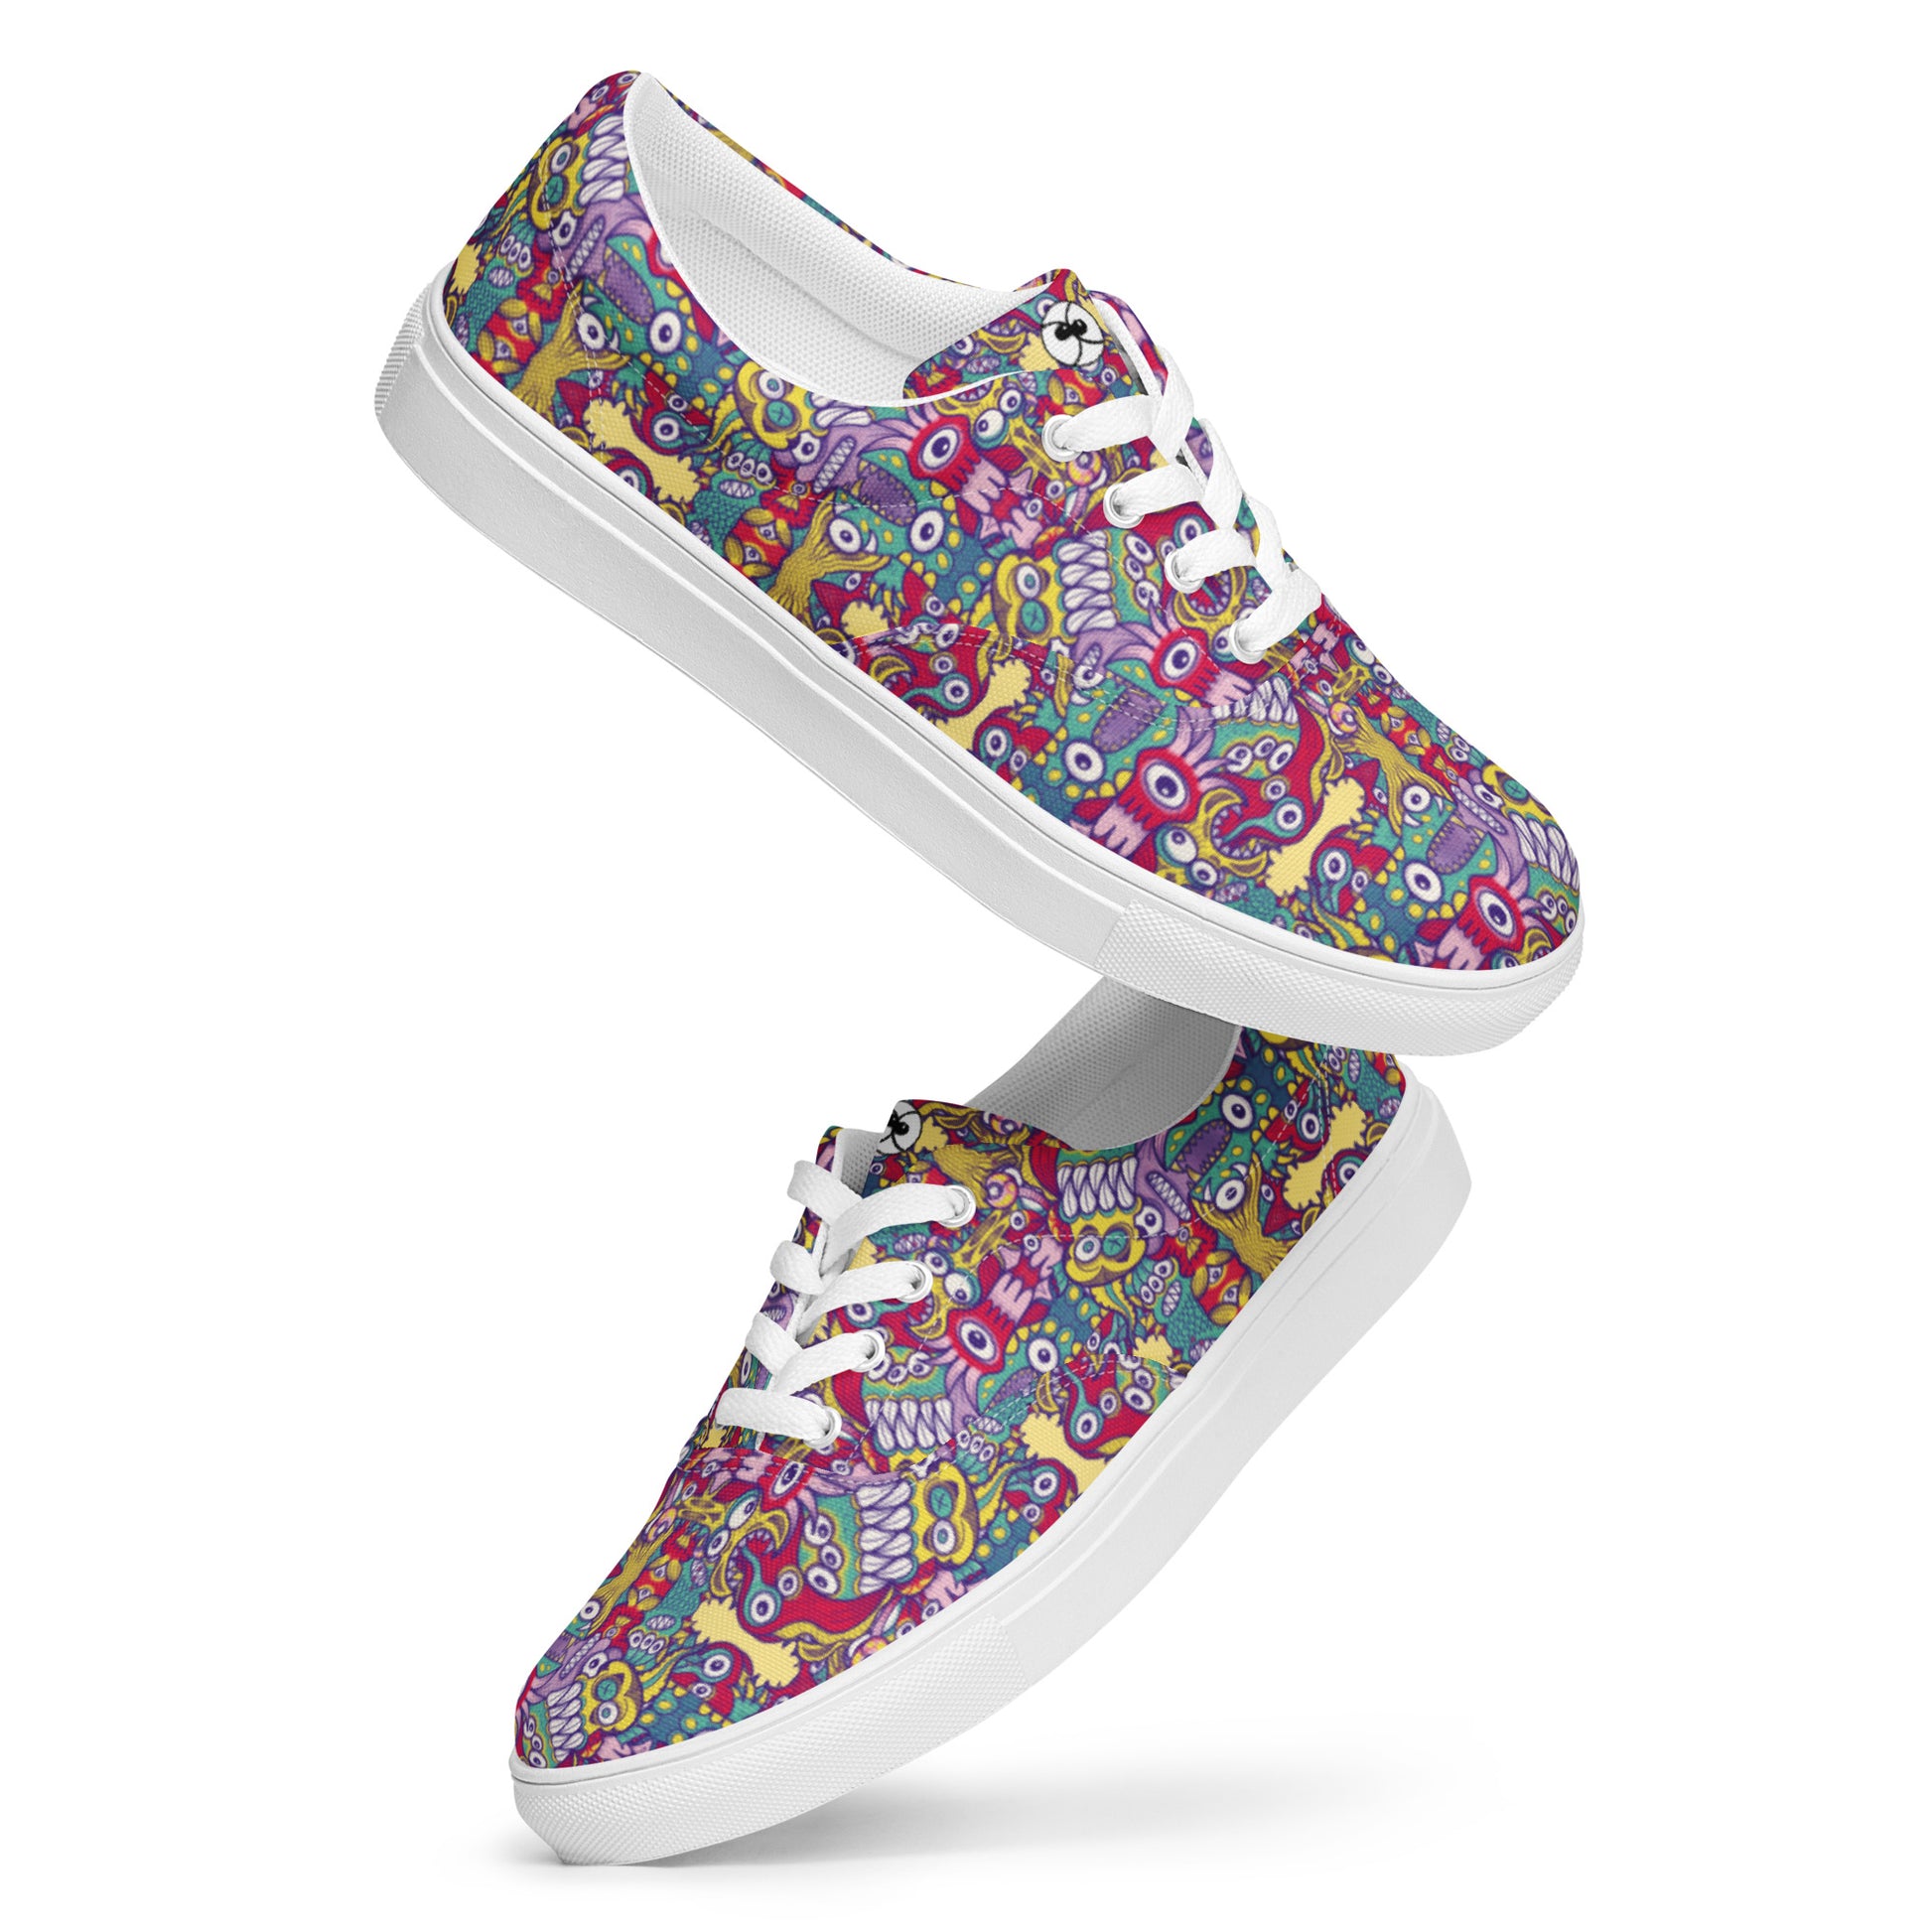 Exquisite corpse of doodles in a pattern design Men’s lace-up canvas shoes. Playing with shoes